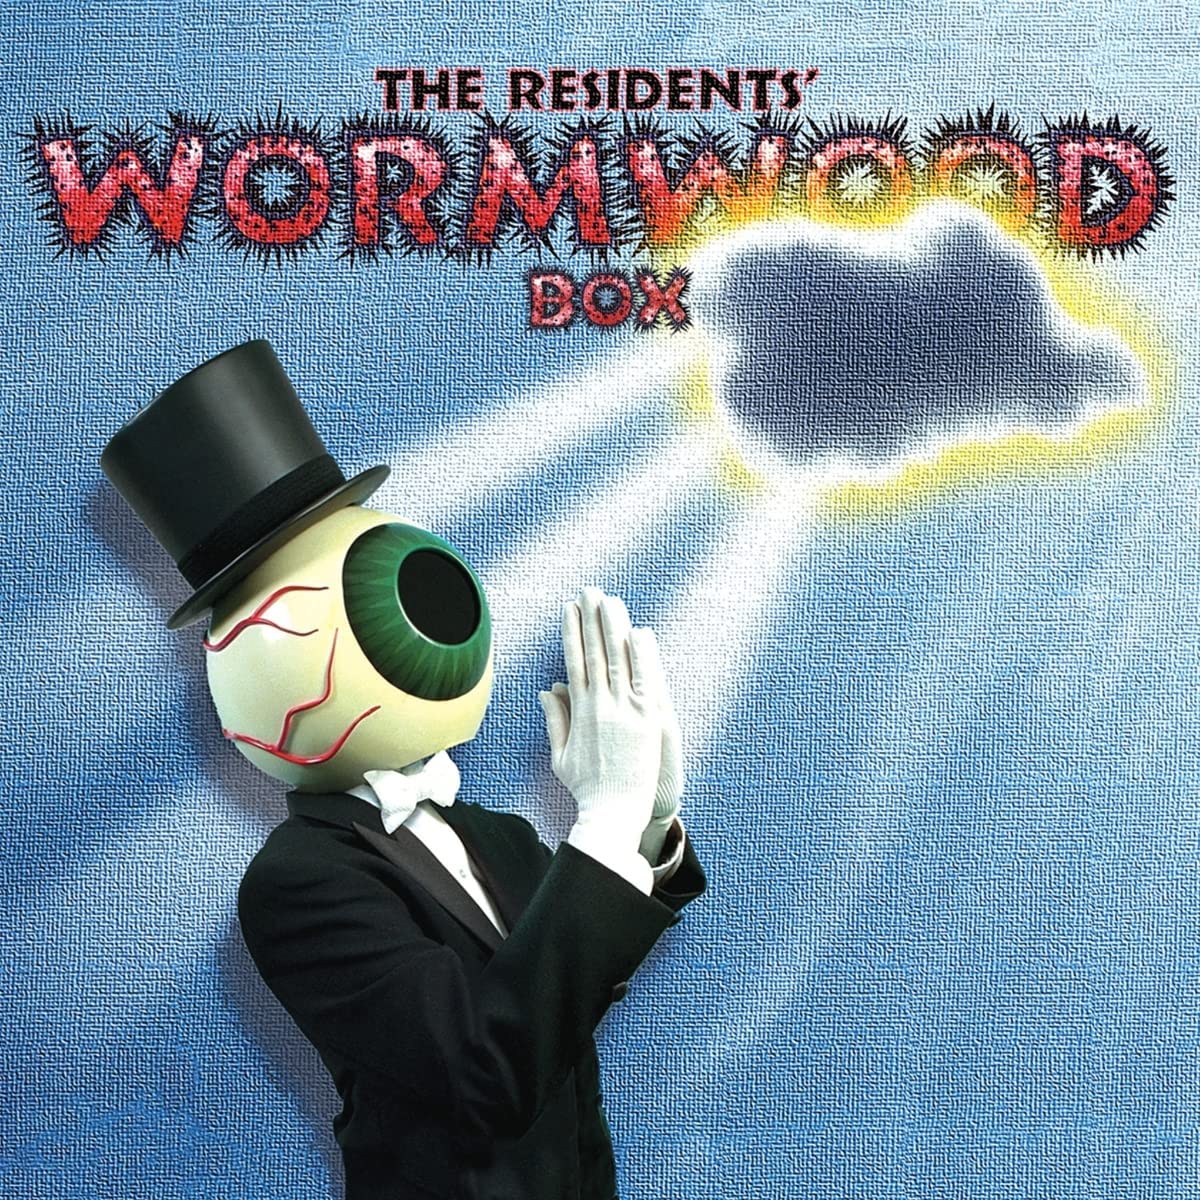 The Residents - Residents - Wormwood Box: Curious Stories From The Bible pREServed - 9CD